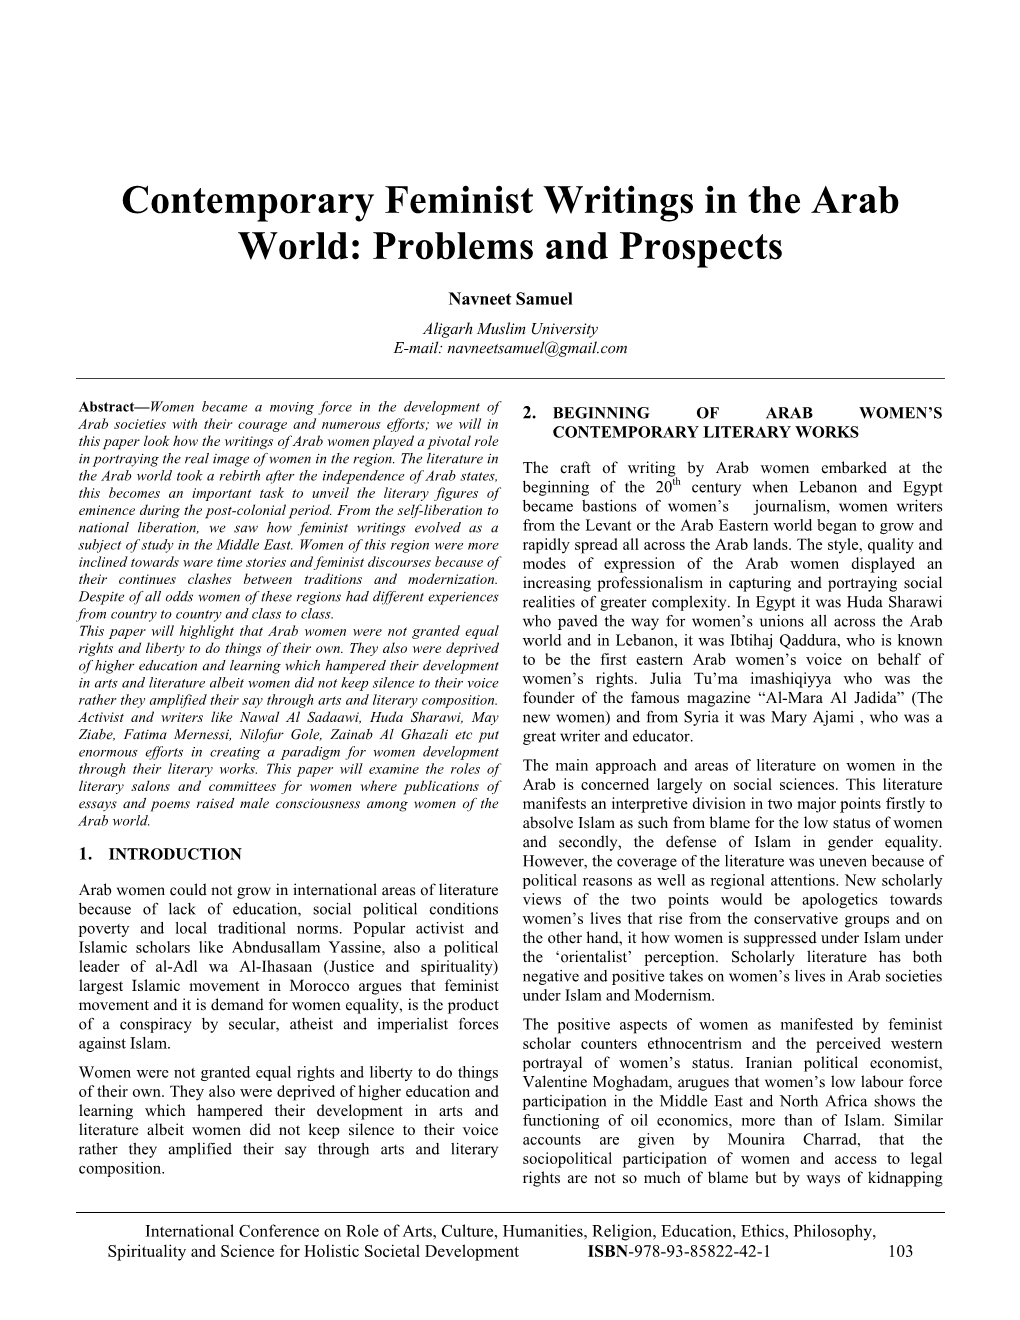 Contemporary Feminist Writings in the Arab World: Problems and Prospects